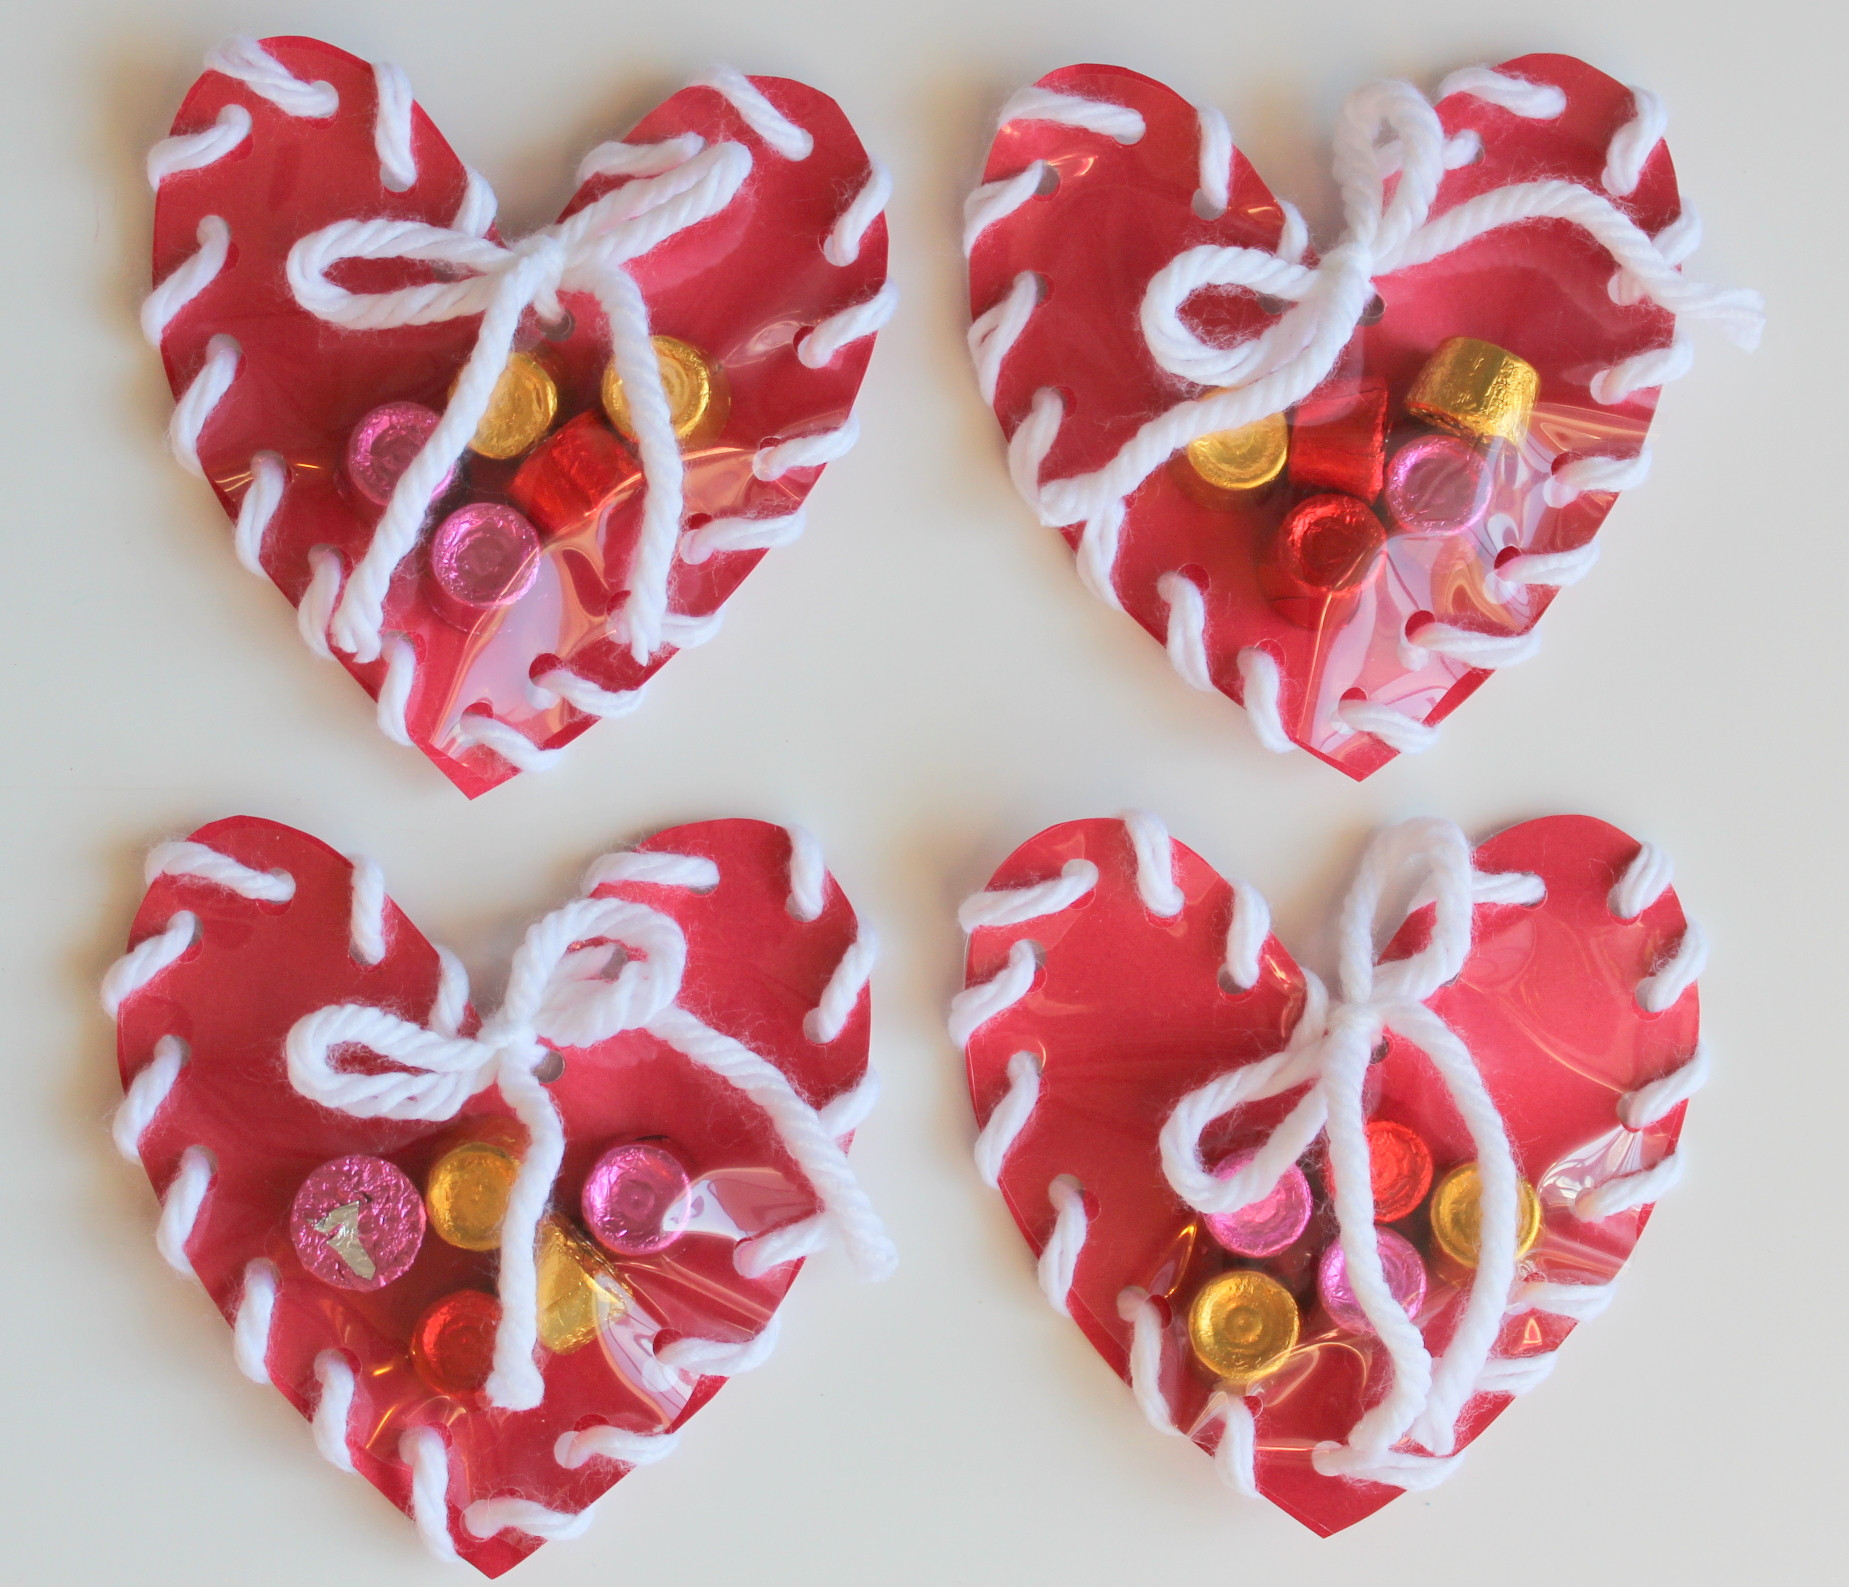 Valentines Day Ideas For Toddlers
 Lollydot Hand Sewn Paper Heart Valentine Craft for Kids